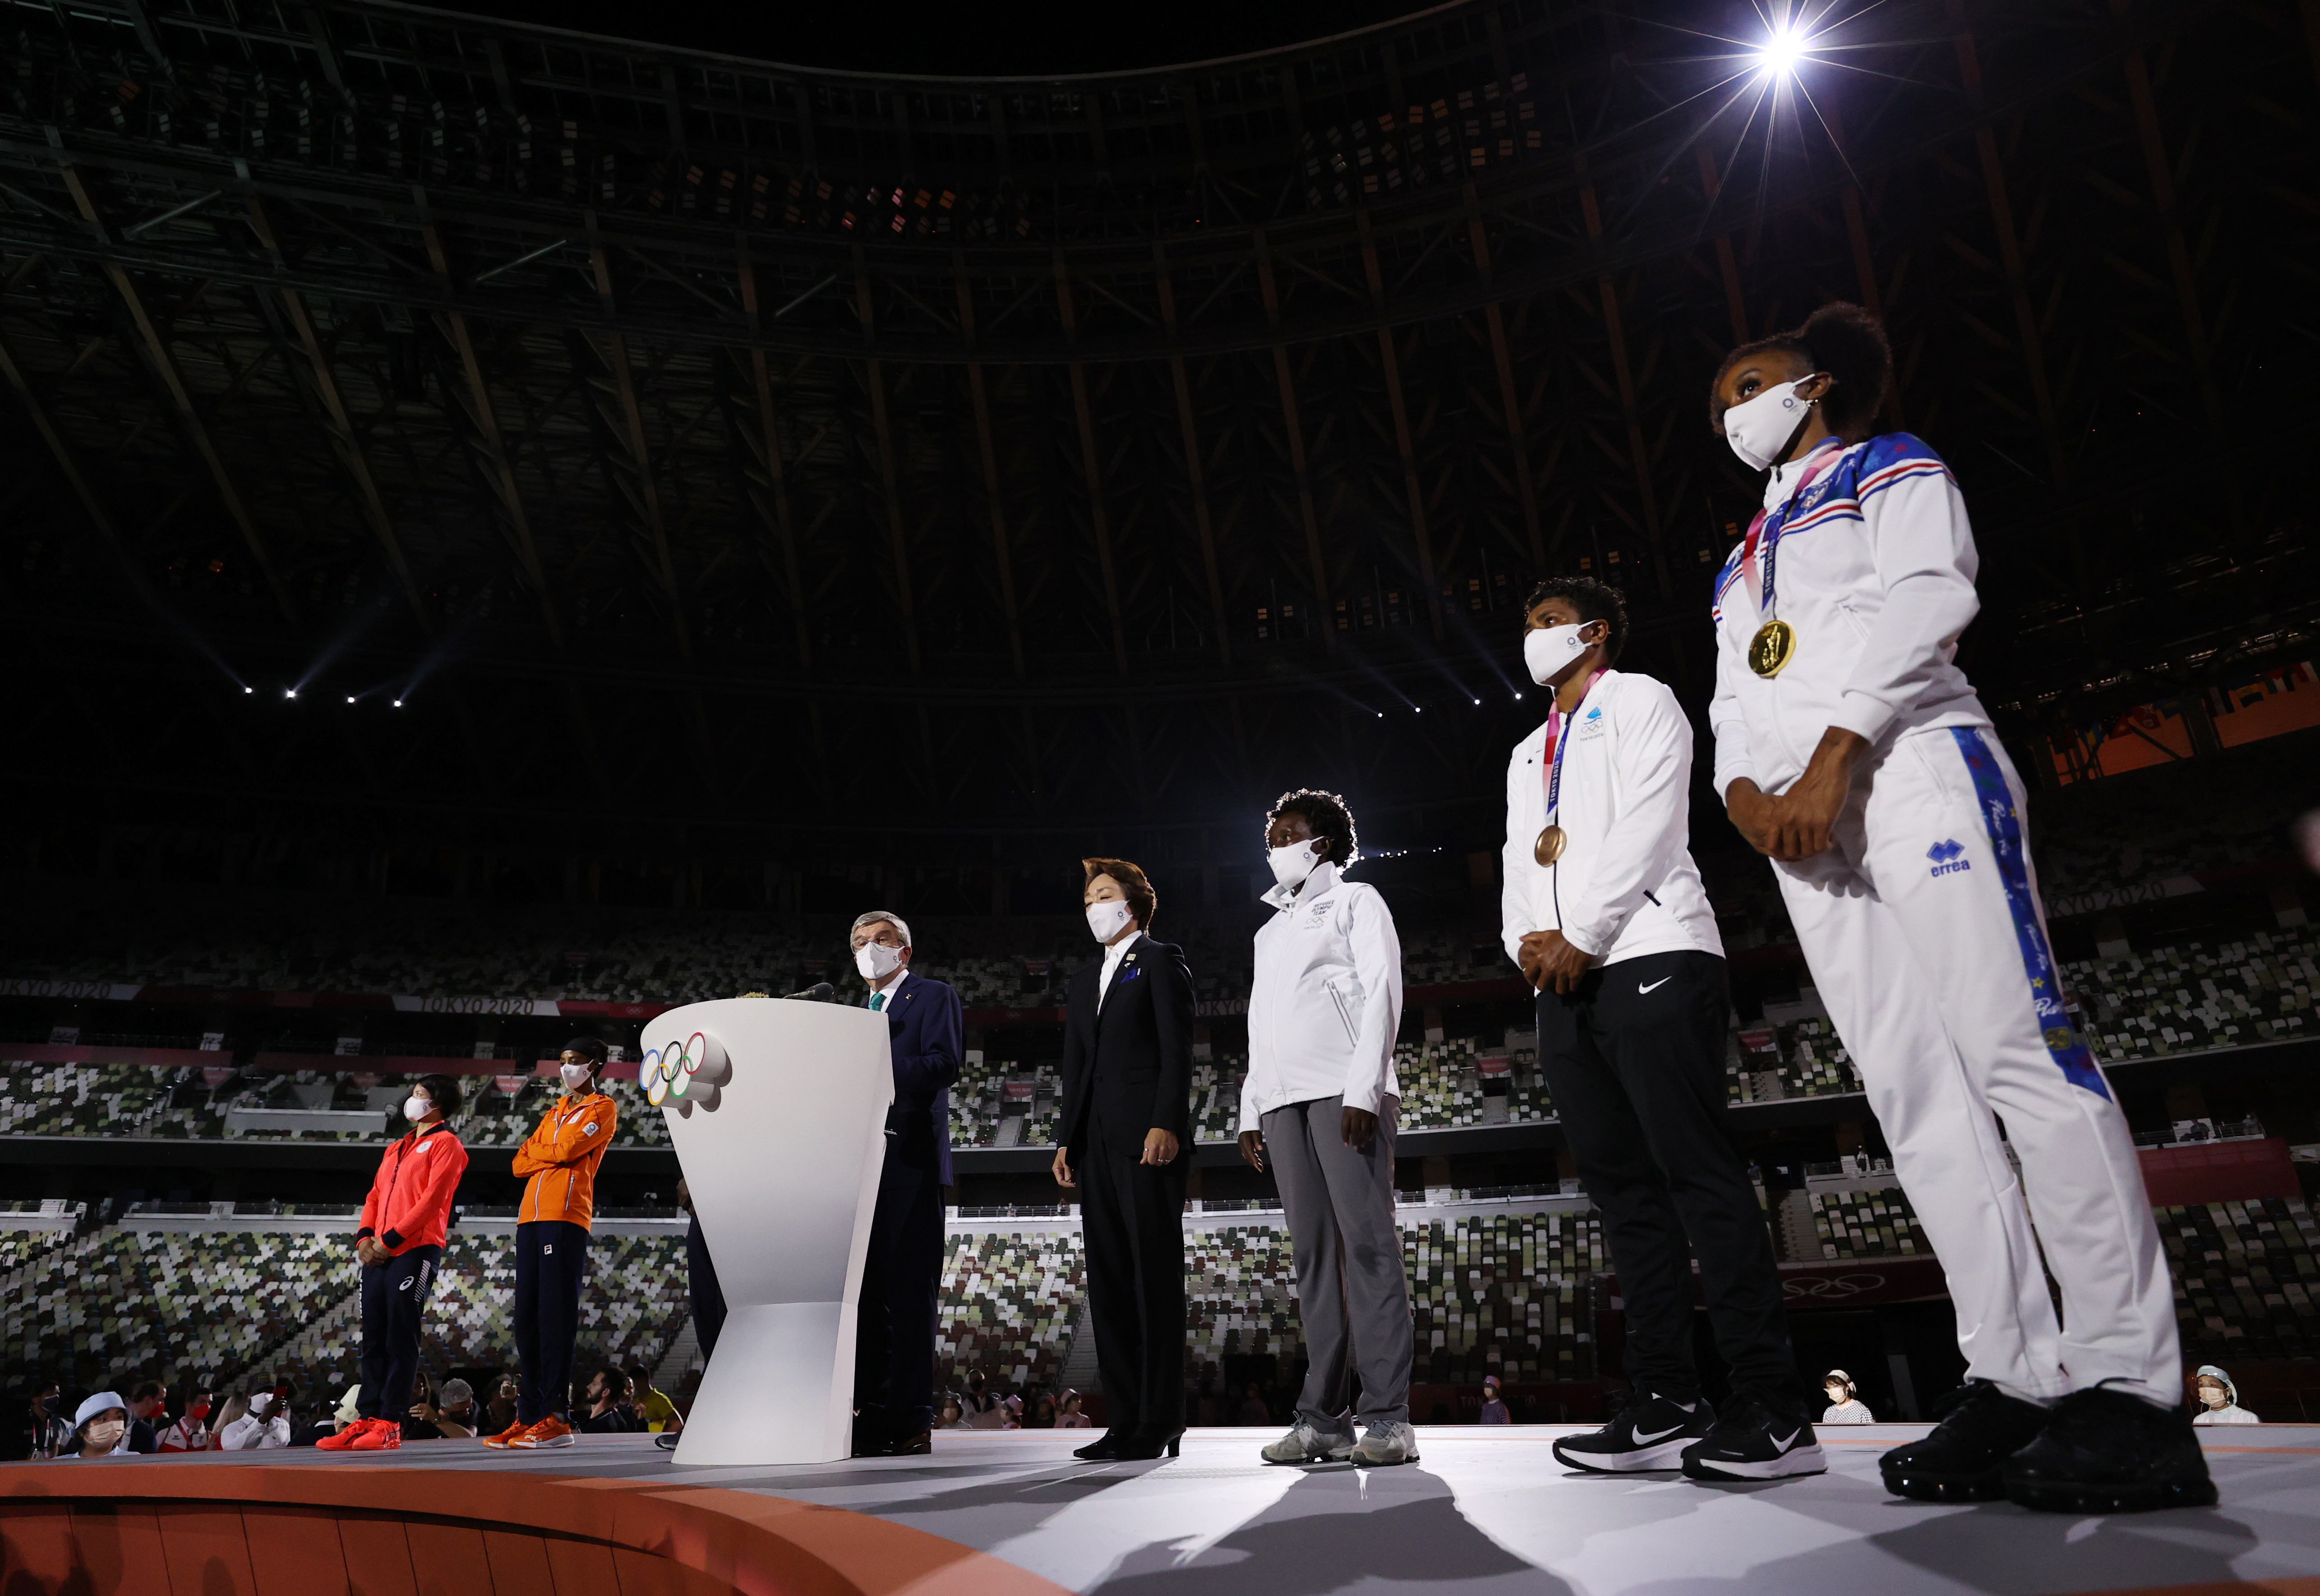 Tokyo 2020 Olympics - The Tokyo 2020 Olympics Closing Ceremony - Olympic Stadium, Tokyo, Japan - August 8, 2021. International Olympic Committee (IOC) President Thomas Bach delivers a speech as representatives from each continent and the Refugee Olympic Team look on Pool via REUTERS/Dan Mullan